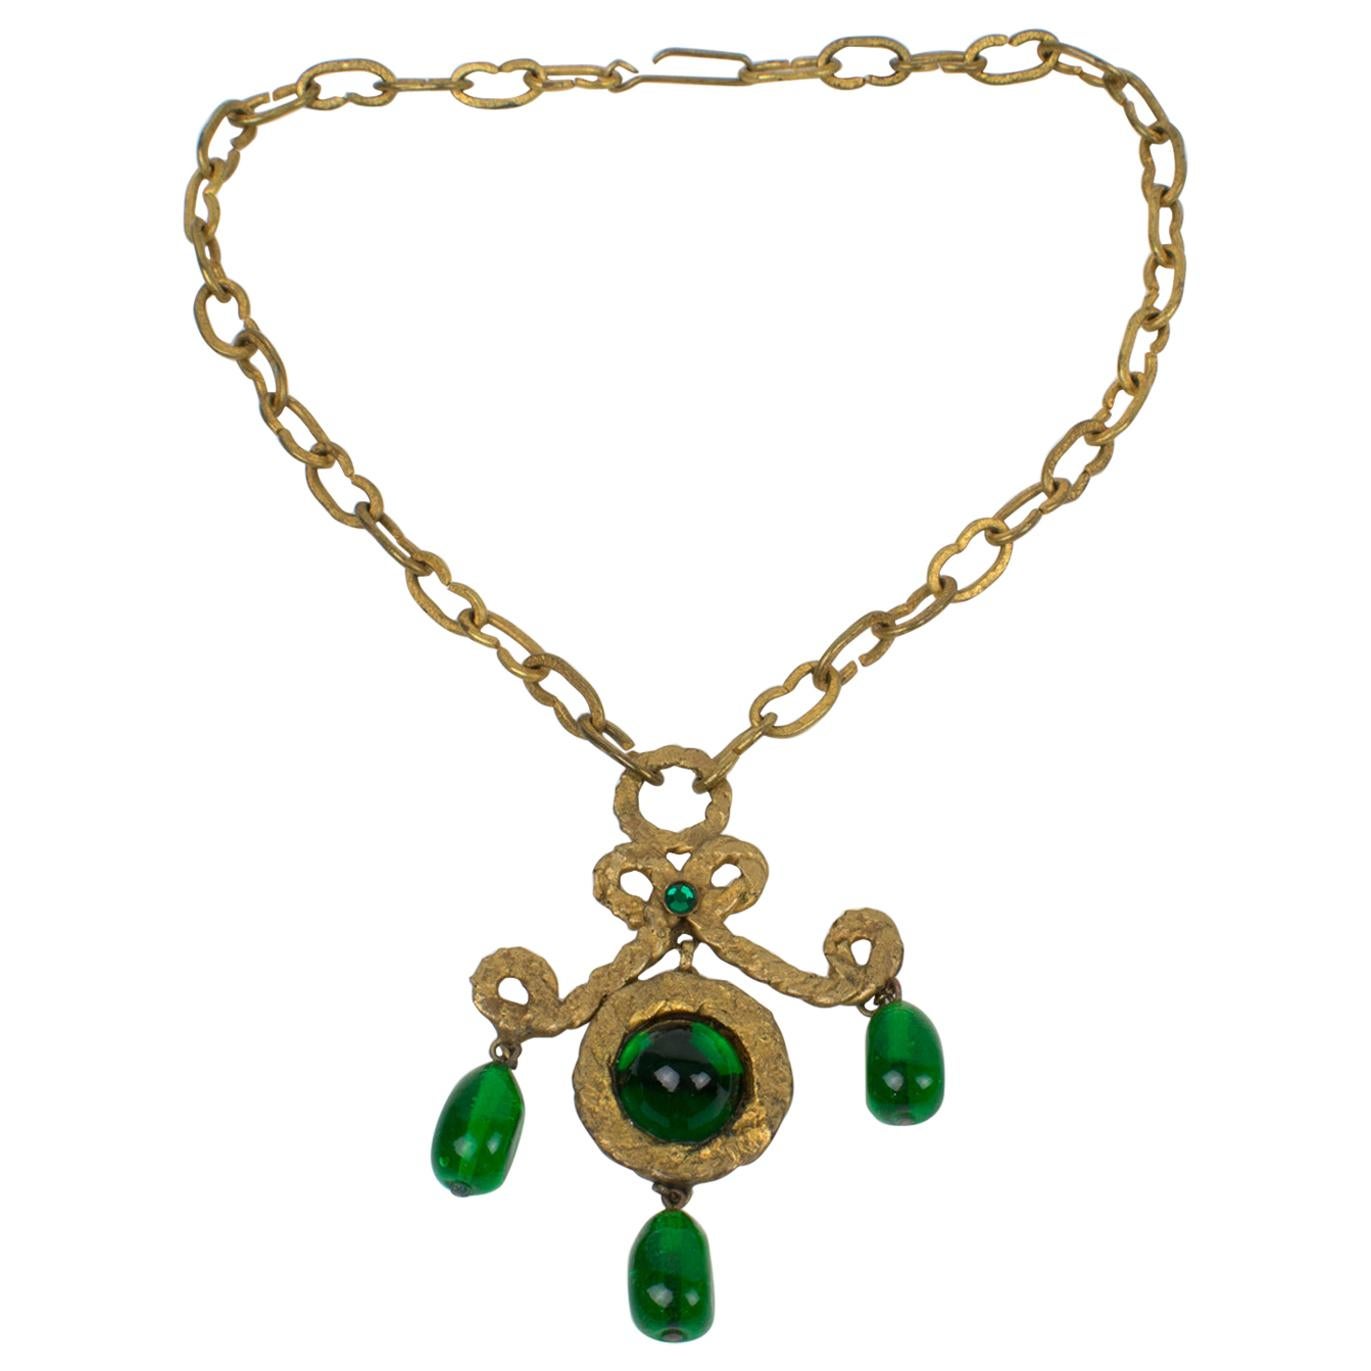 Henry Perichon Gilded Bronze Necklace with Green Poured Glass Beads